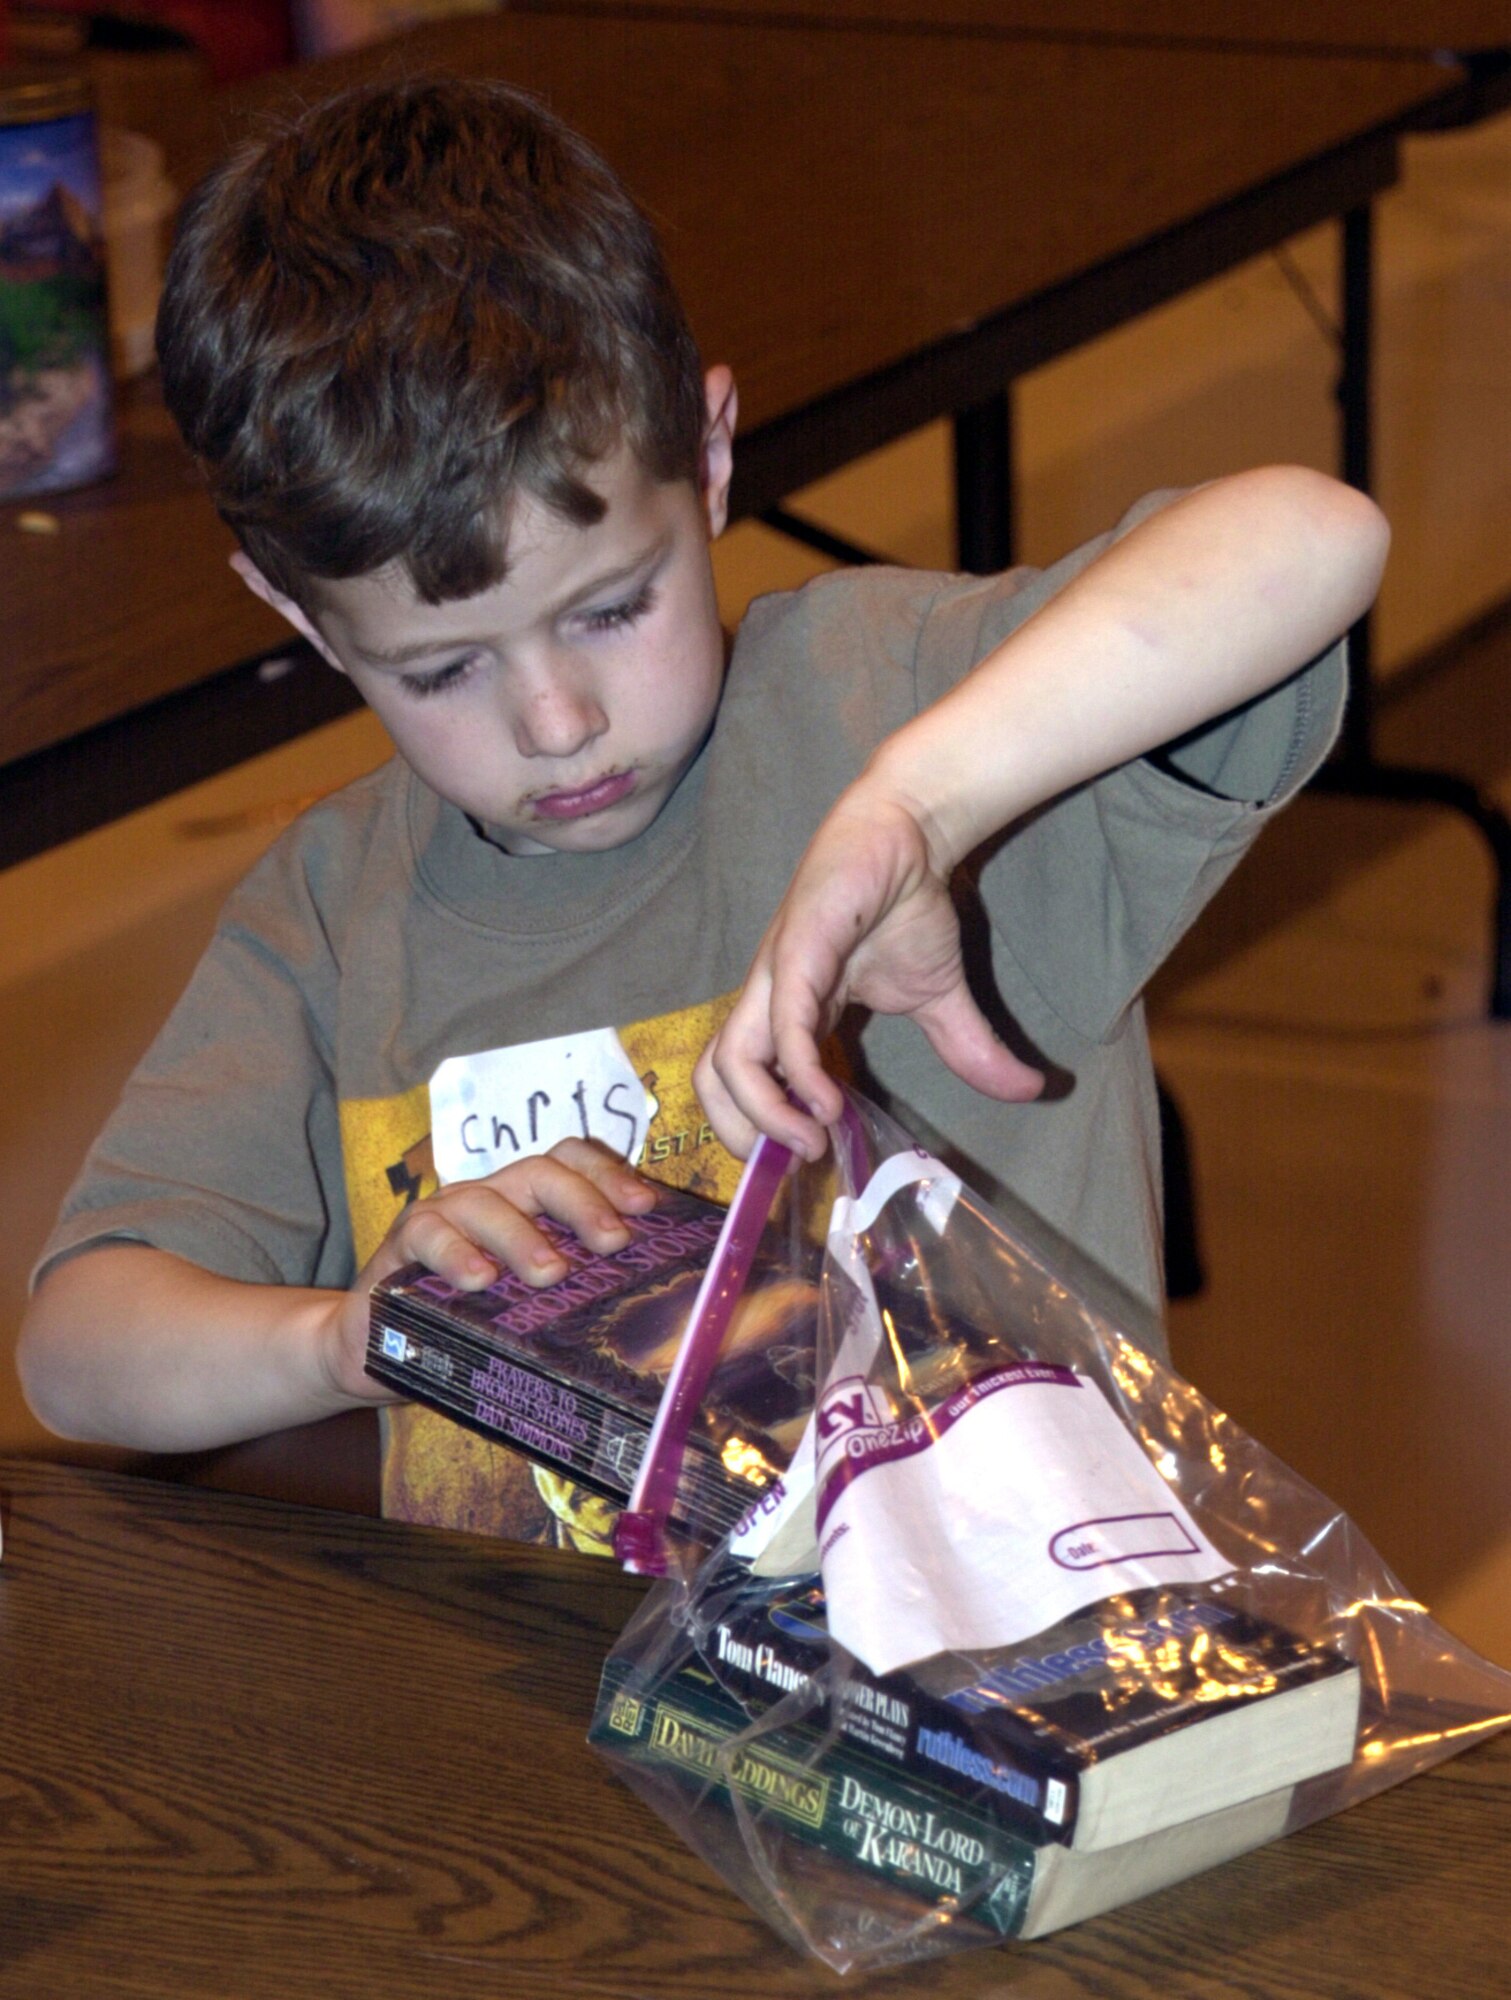 ANDREWS AIR FORCE BASE, Md. -- Chris Turner, age 6, puts books into a plastic bag that will be sent in a care package to his father’s deployed unit, the 113th Aircraft Generation Squadron, D.C. Air National Guard.  Master Sgt. Mike Turner and other members of the squadron have been deployed for nearly two months. Families of the D.C. ANG gathered April 12 at Andrews Air Force Base, Md., for a pot-luck dinner, children’s games and a chance to help relieve some of the stress associated with the deployment of a loved one. (U.S. Air Force photo by Staff Sgt. A.J. Bosker)